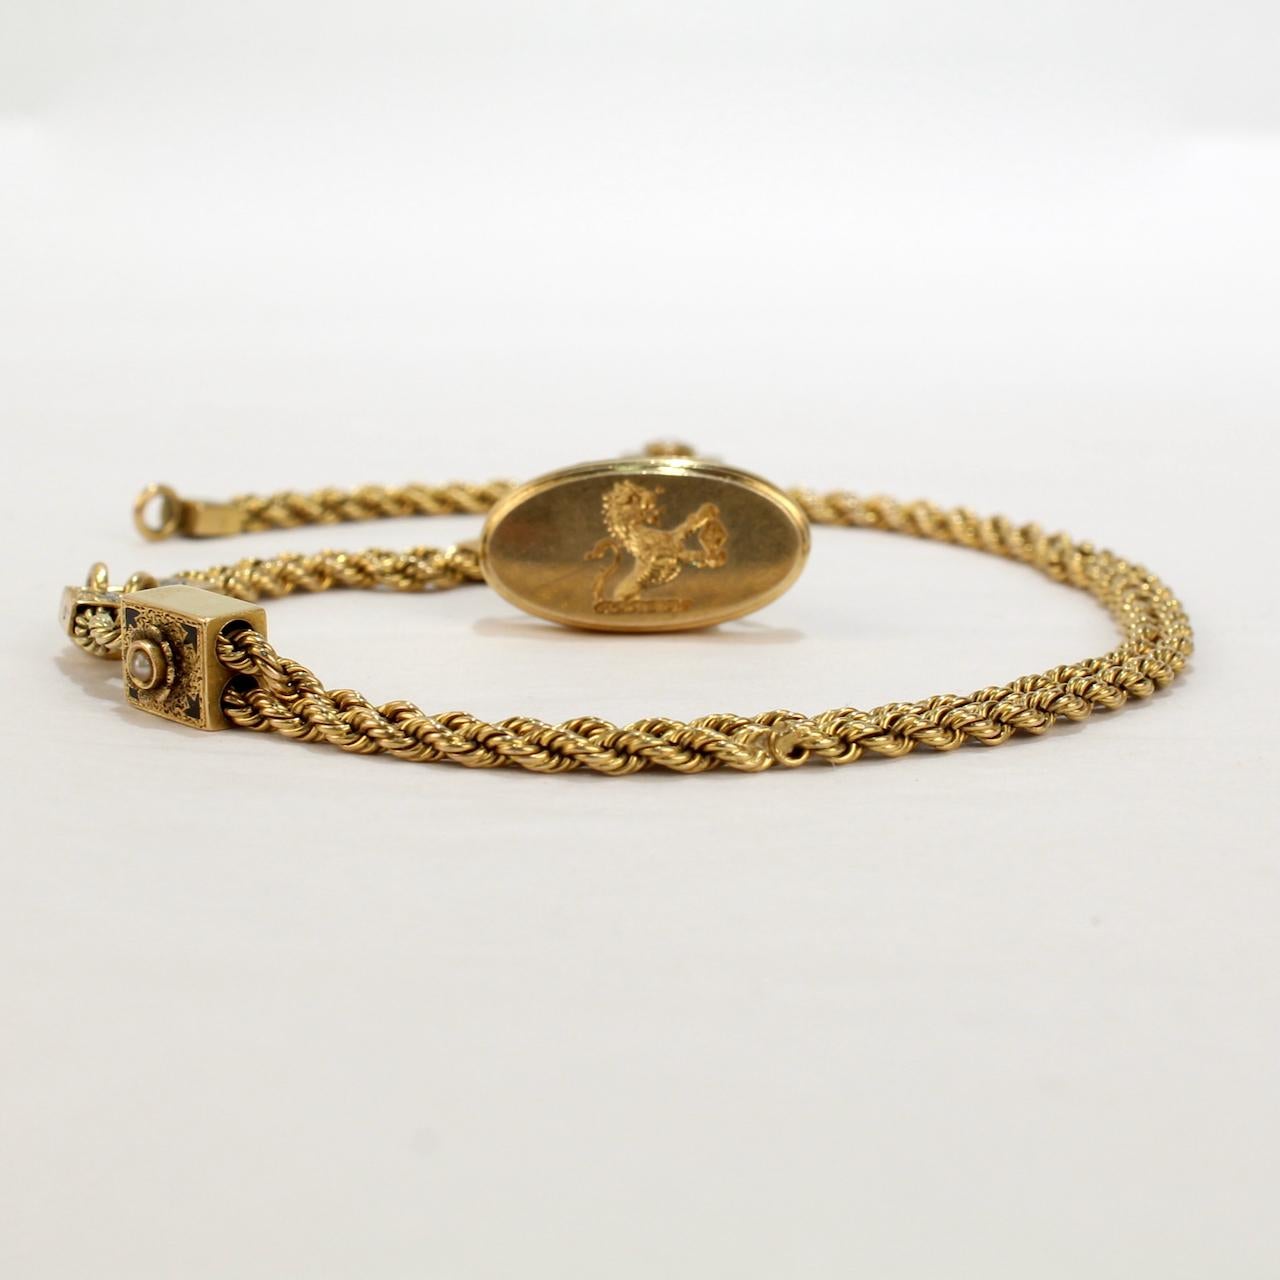 A very fine Victorian 14k gold and enamel watch chain with slides and a fob seal.

Comprised of a 14k gold rope chain with a decorative enameled gold slide and caps. 

A seal is attached with a jump ring to the end of the chain and bears an engraved